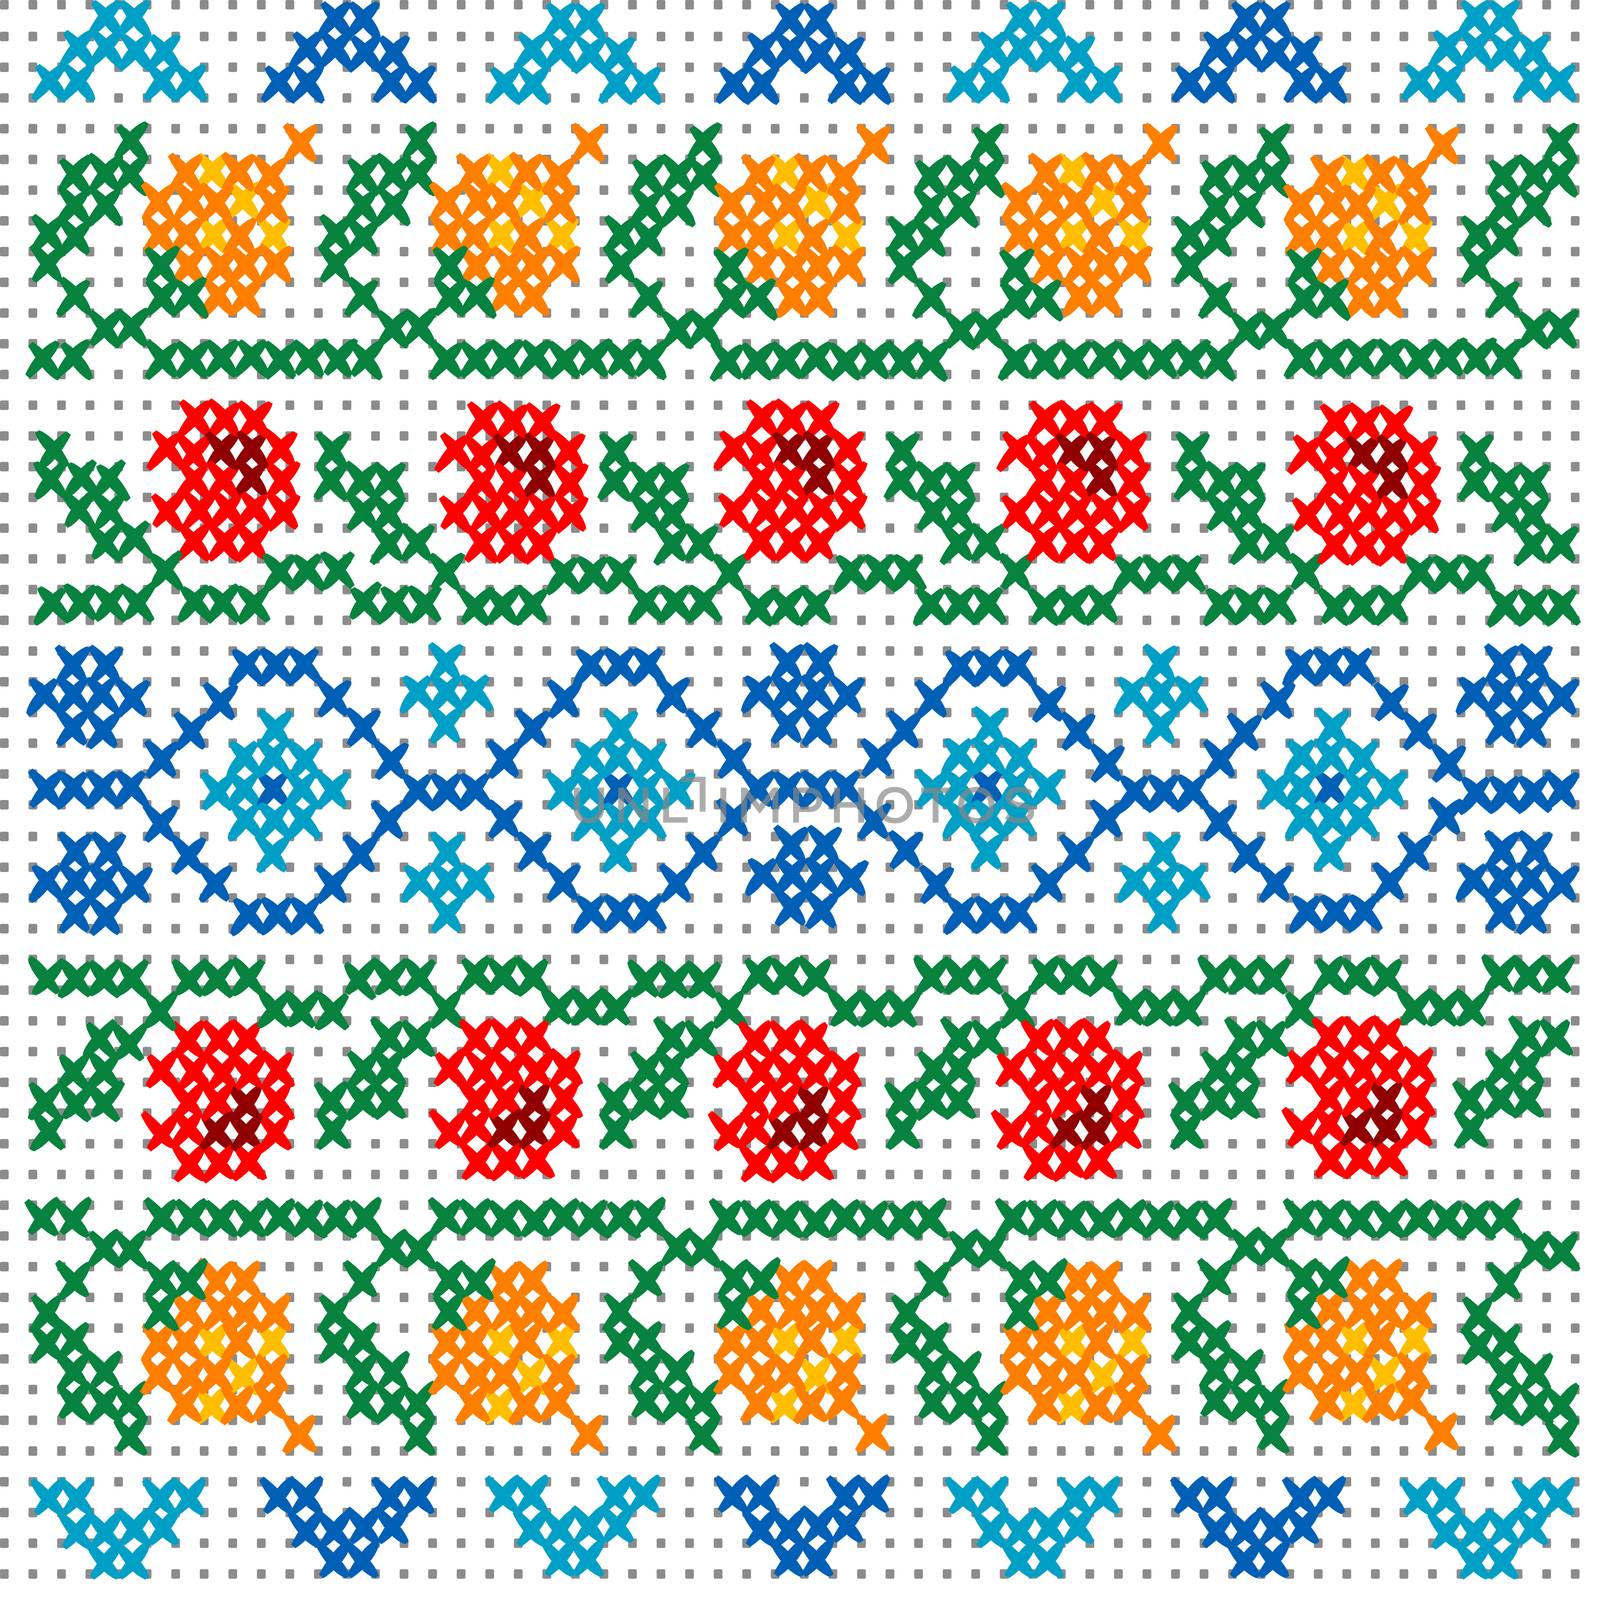 Cross stitch pattern for clothing with colorful elements of folk embroidery